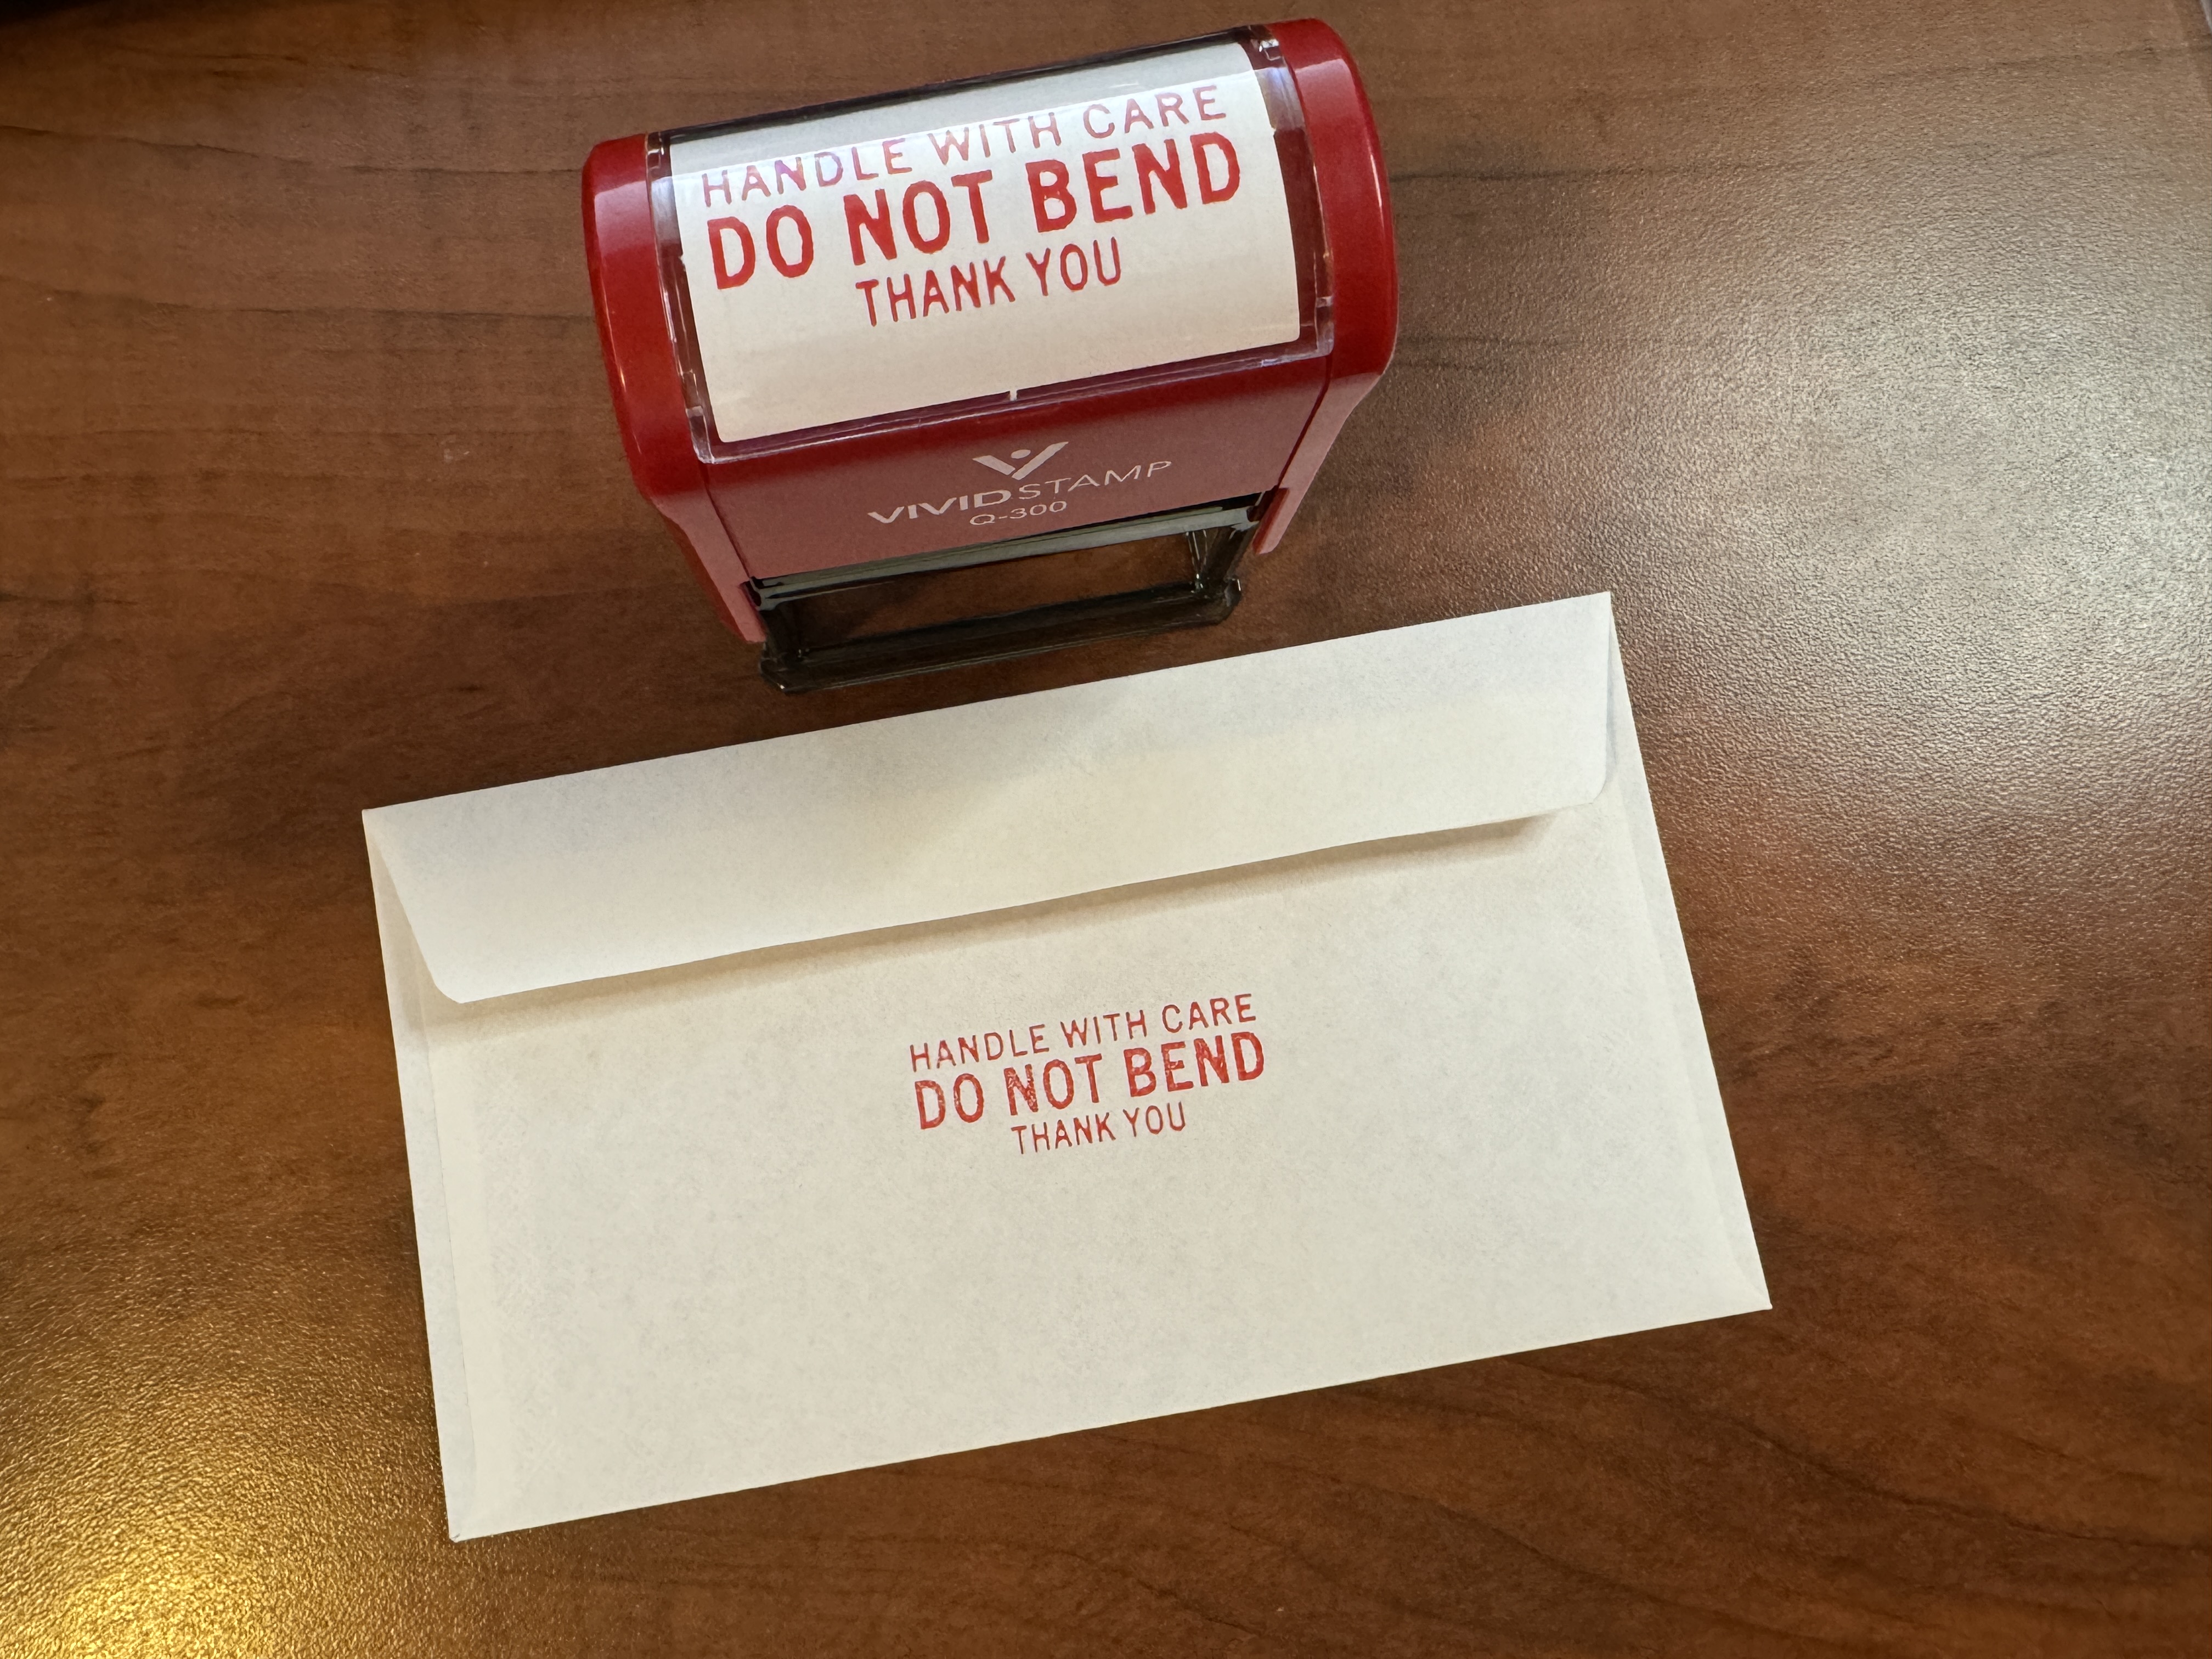 Envelope stamped with "Handle with Care, Do Not Bend, Thank You"